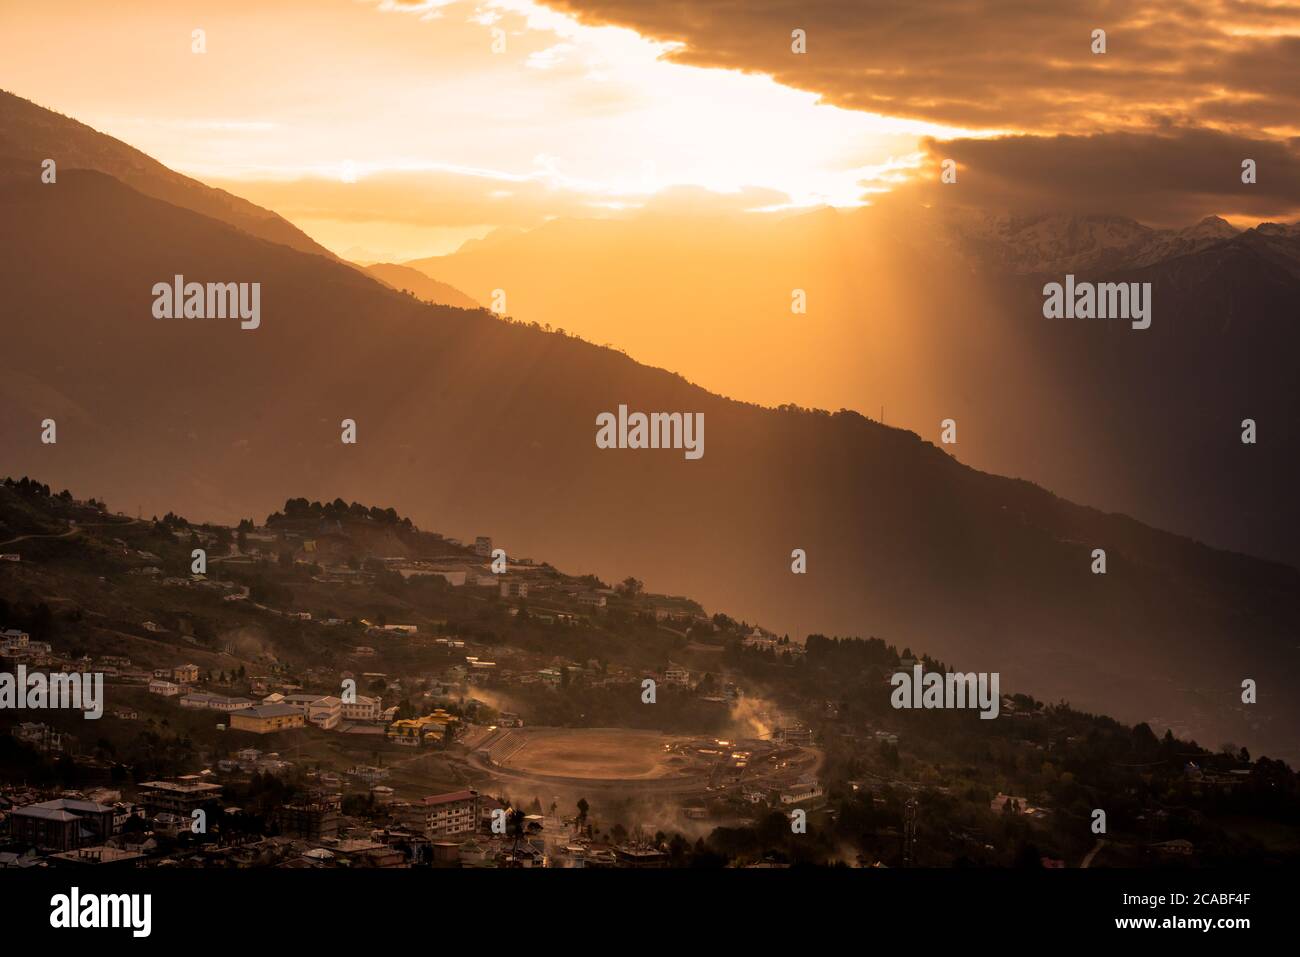 Sunrise over the mountains, scenic sunrise landscape of Tawang town, this town is situated on the foothills of the Himalayas in Arunachal Pradesh in I Stock Photo